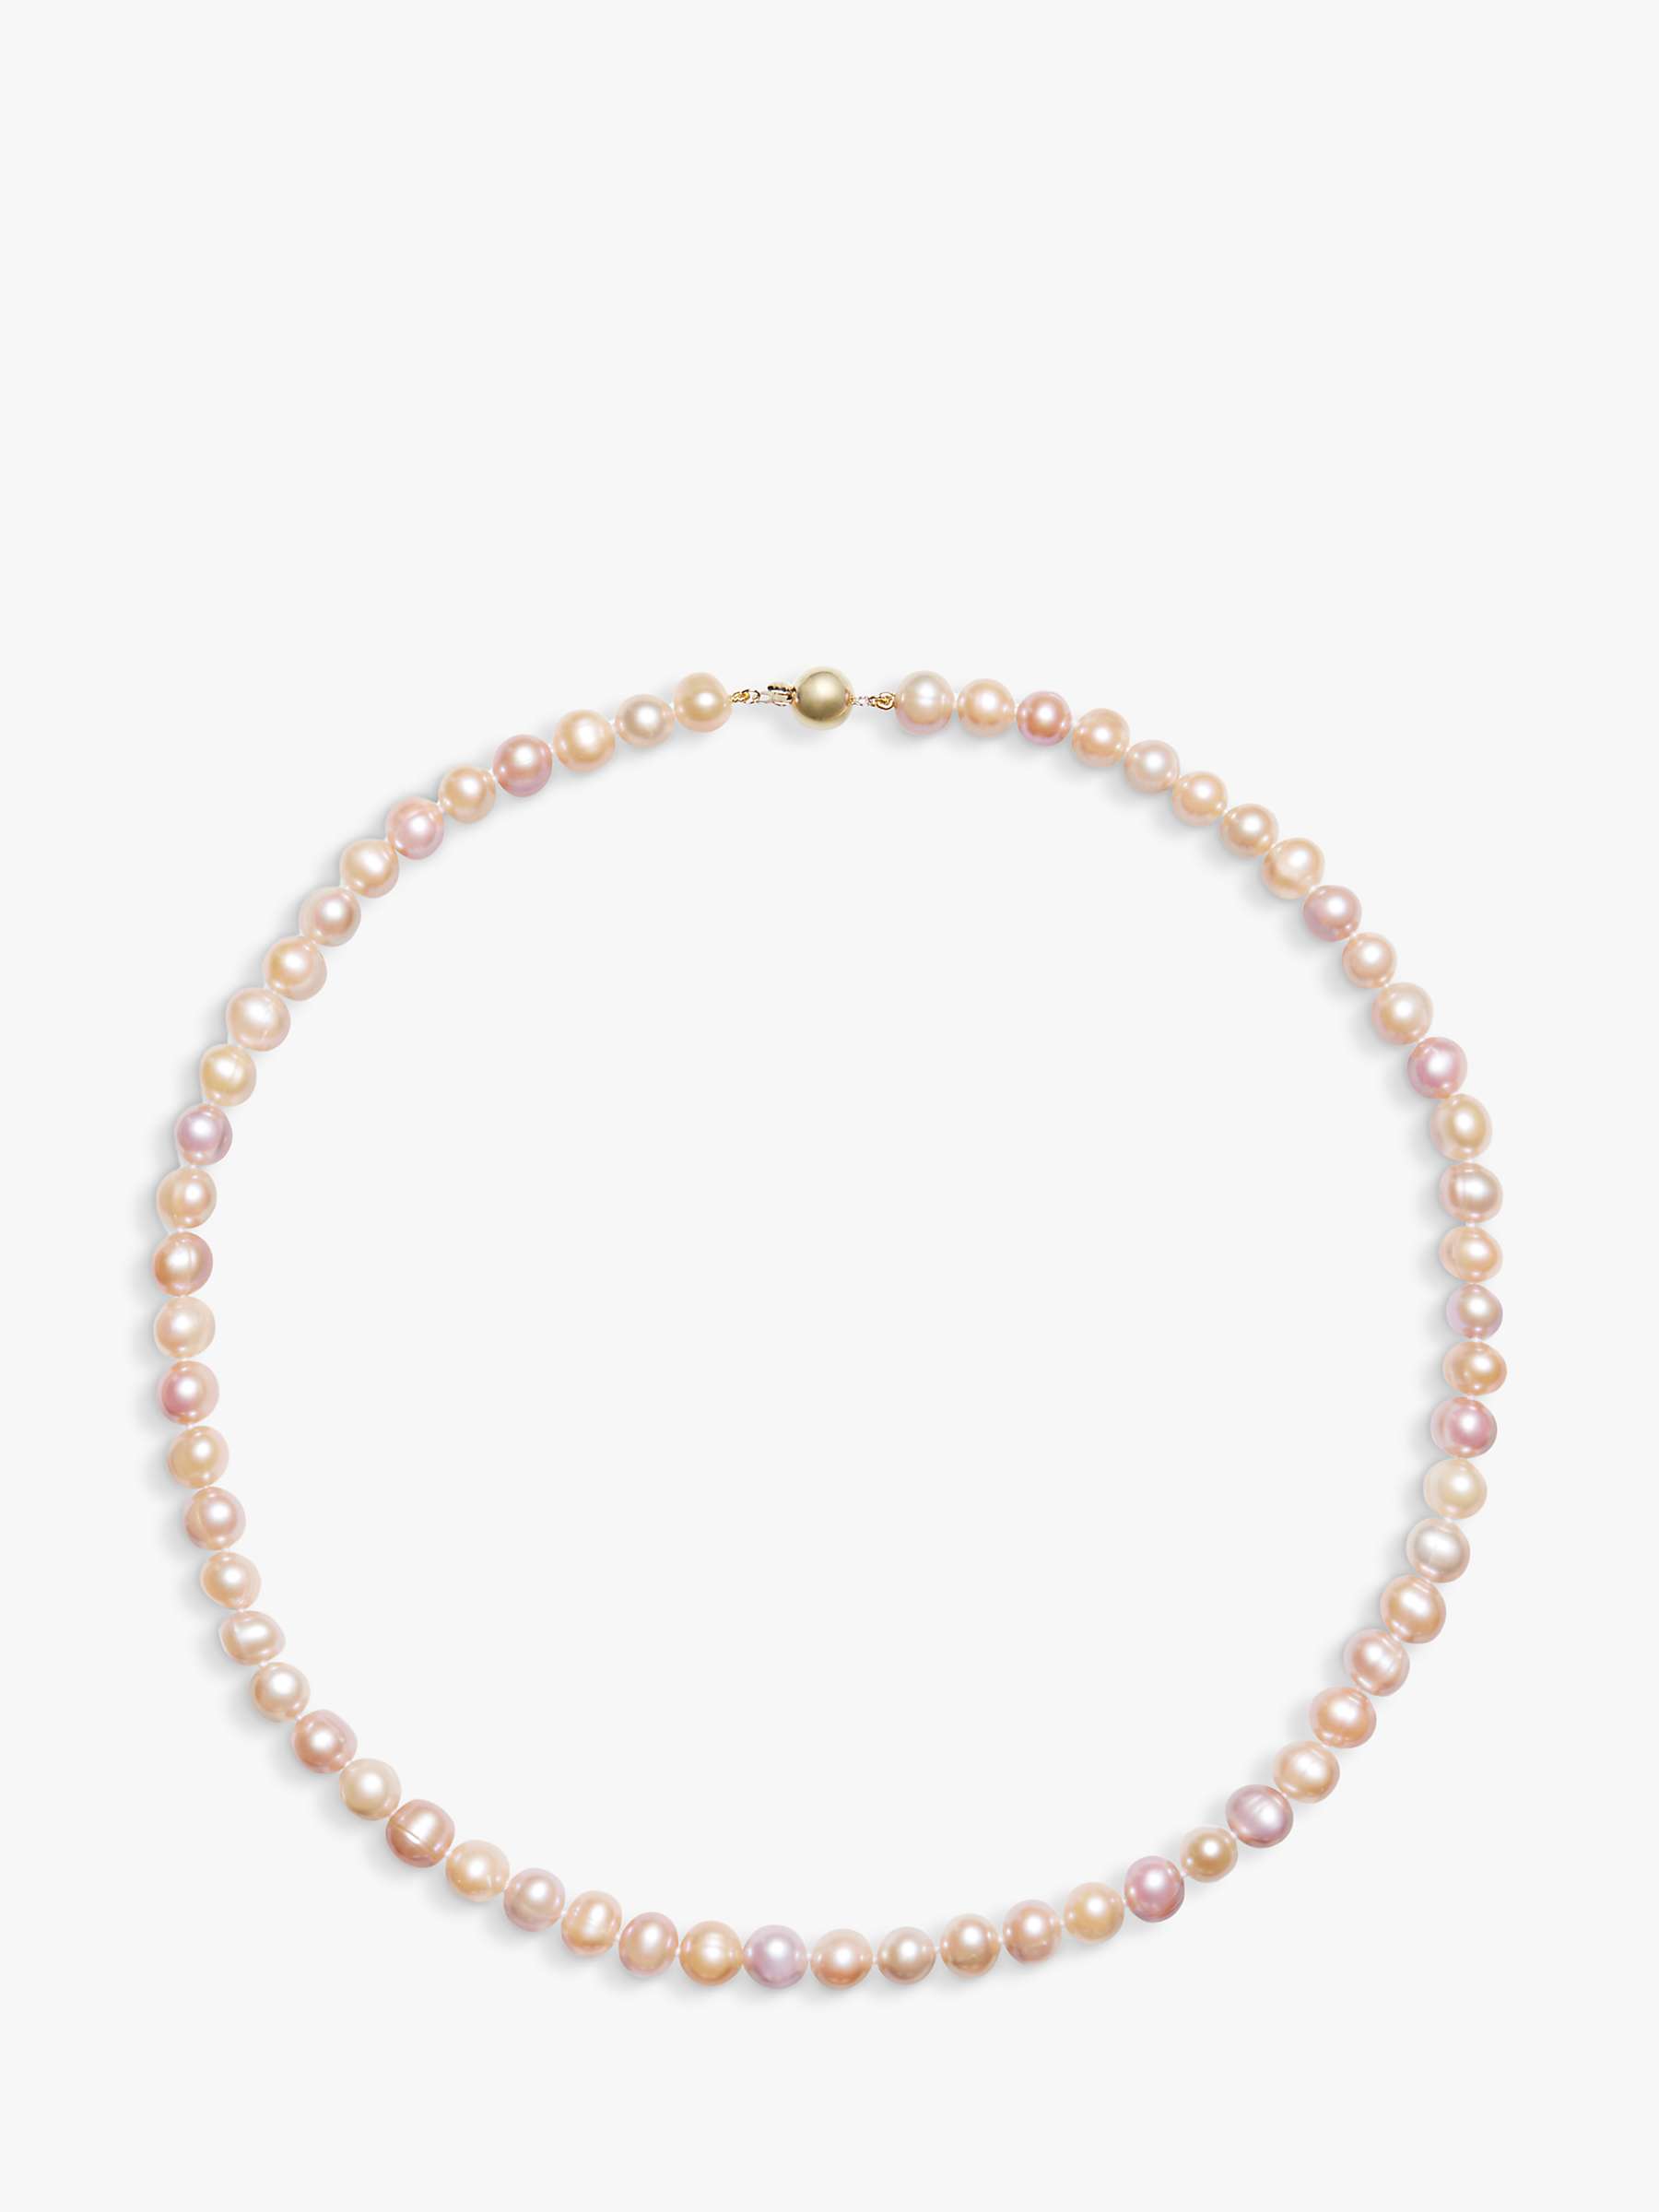 Buy A B Davis 9ct Gold Pearl Necklace, Multi Online at johnlewis.com